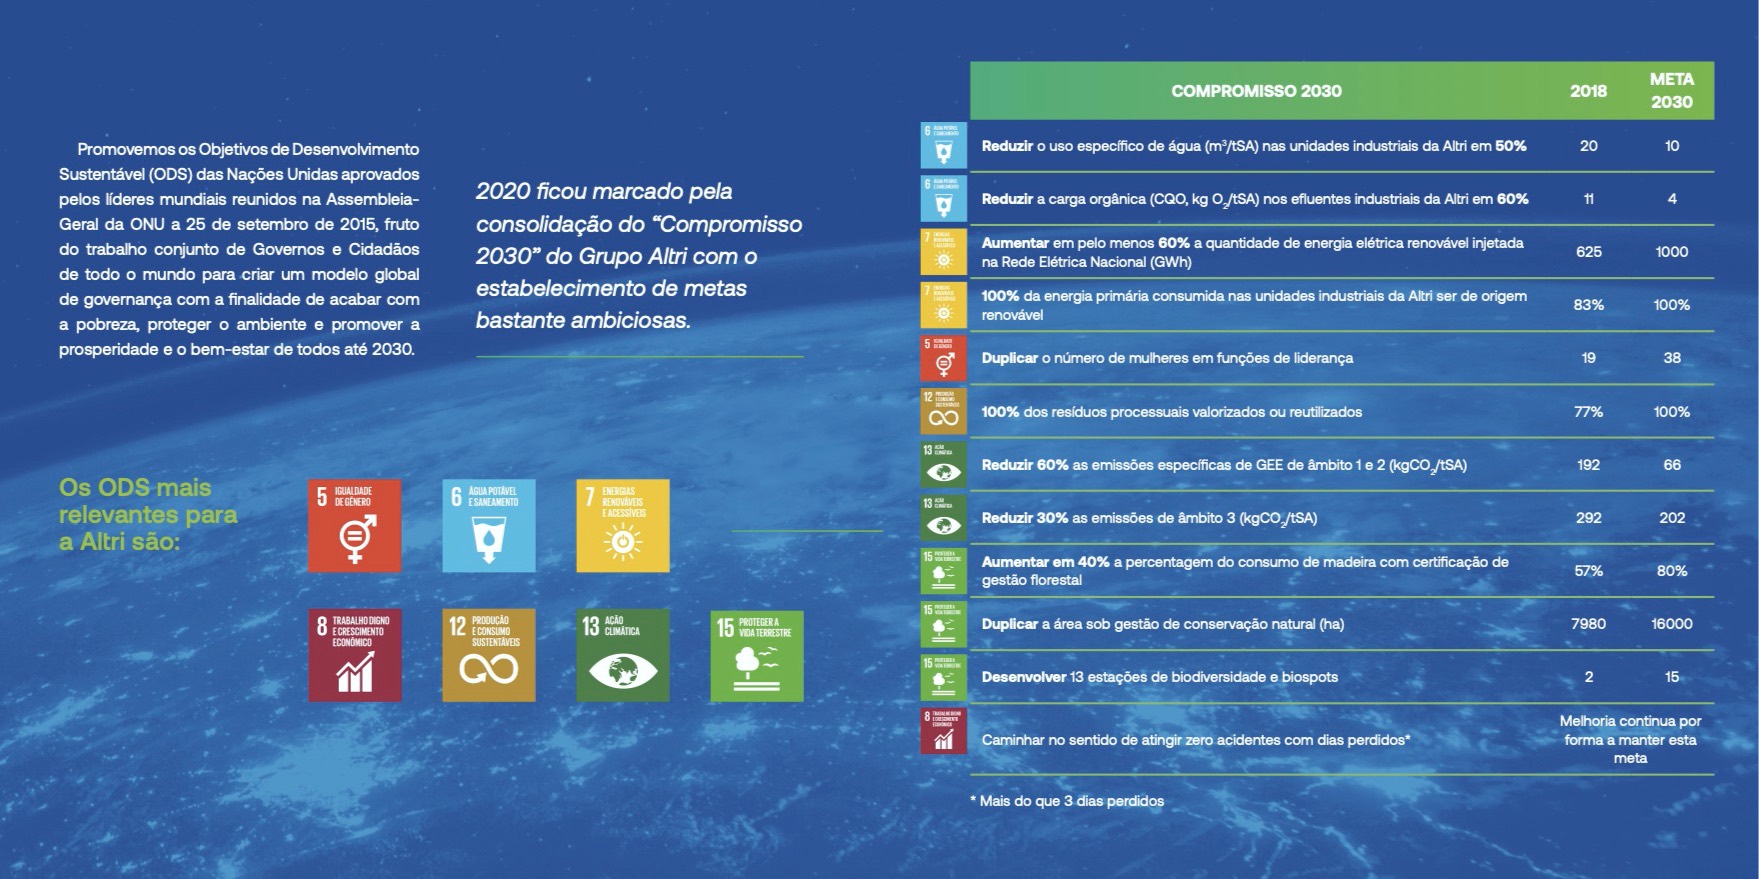 Altri sets sustainability goals with the "2030 commitment" 